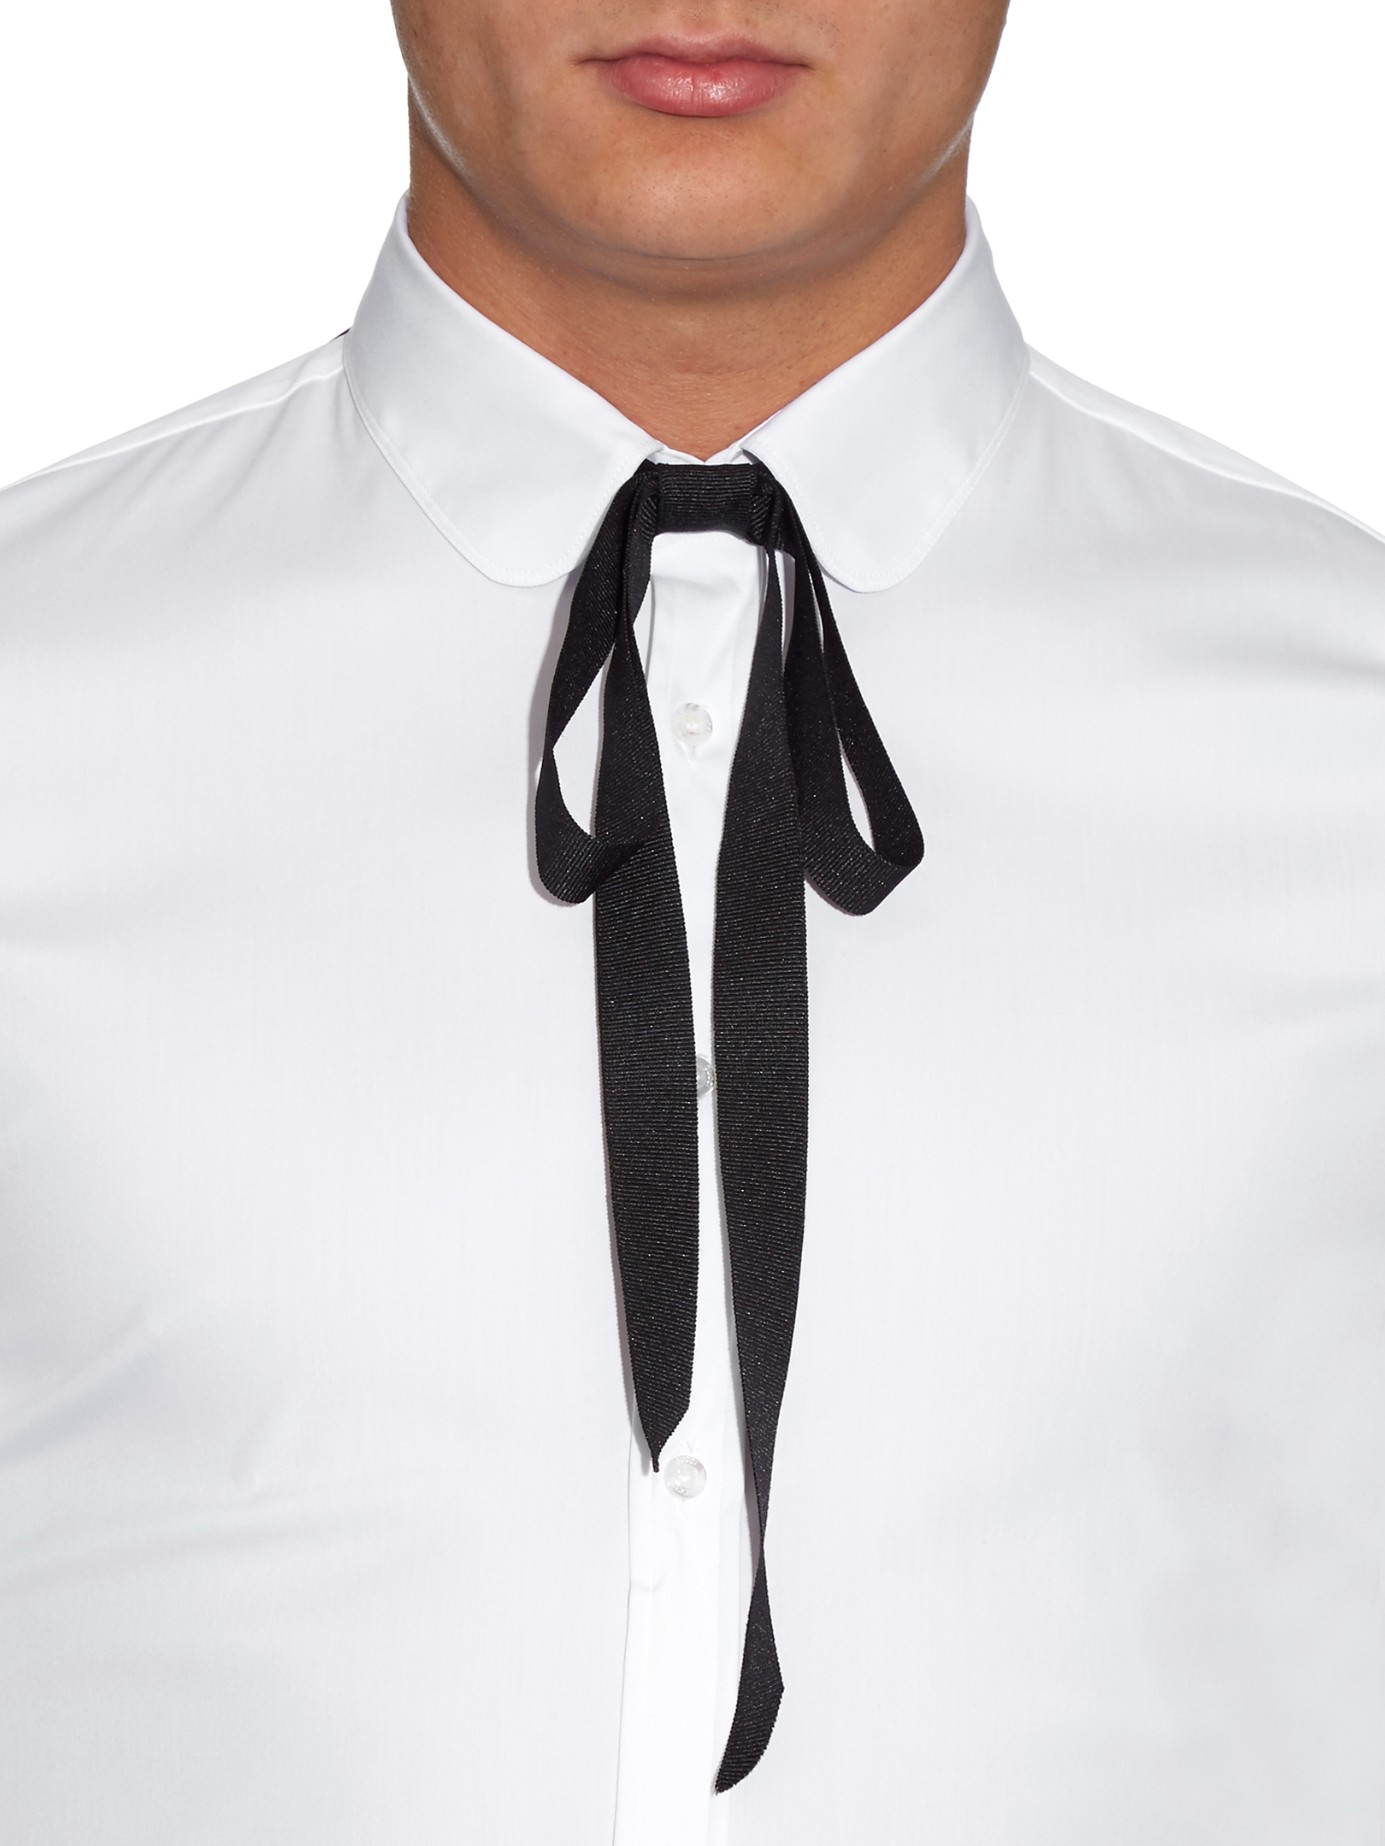 Gucci Grosgrain Neck Bow Tie - Black Bow Ties, Suiting Accessories